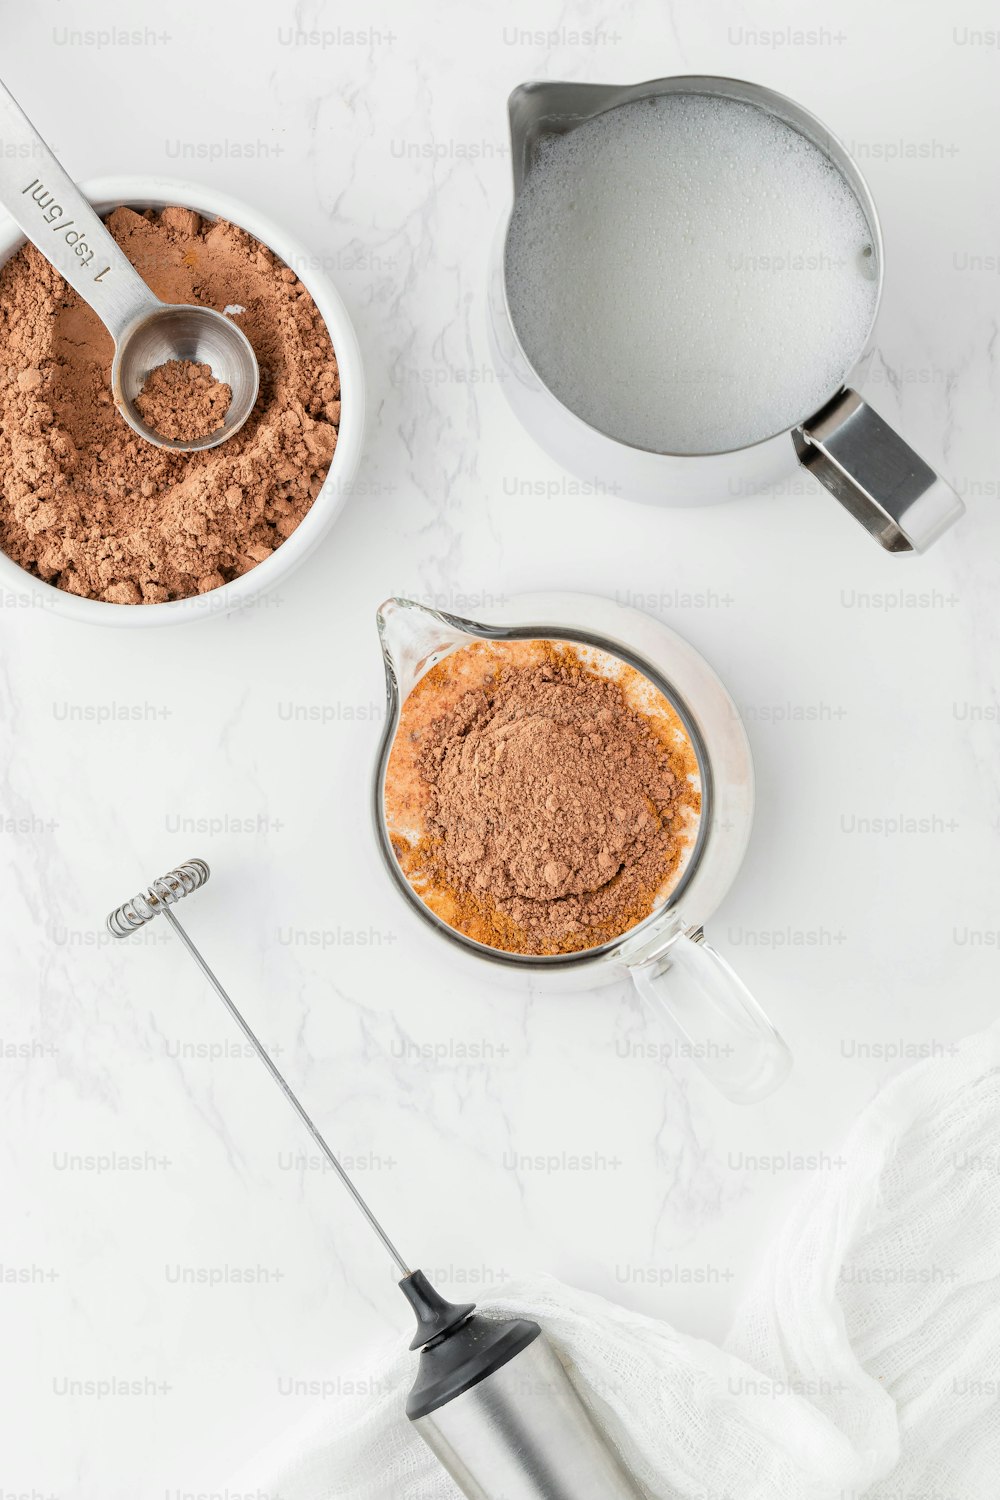 a bowl of chocolate pudding next to a measuring spoon